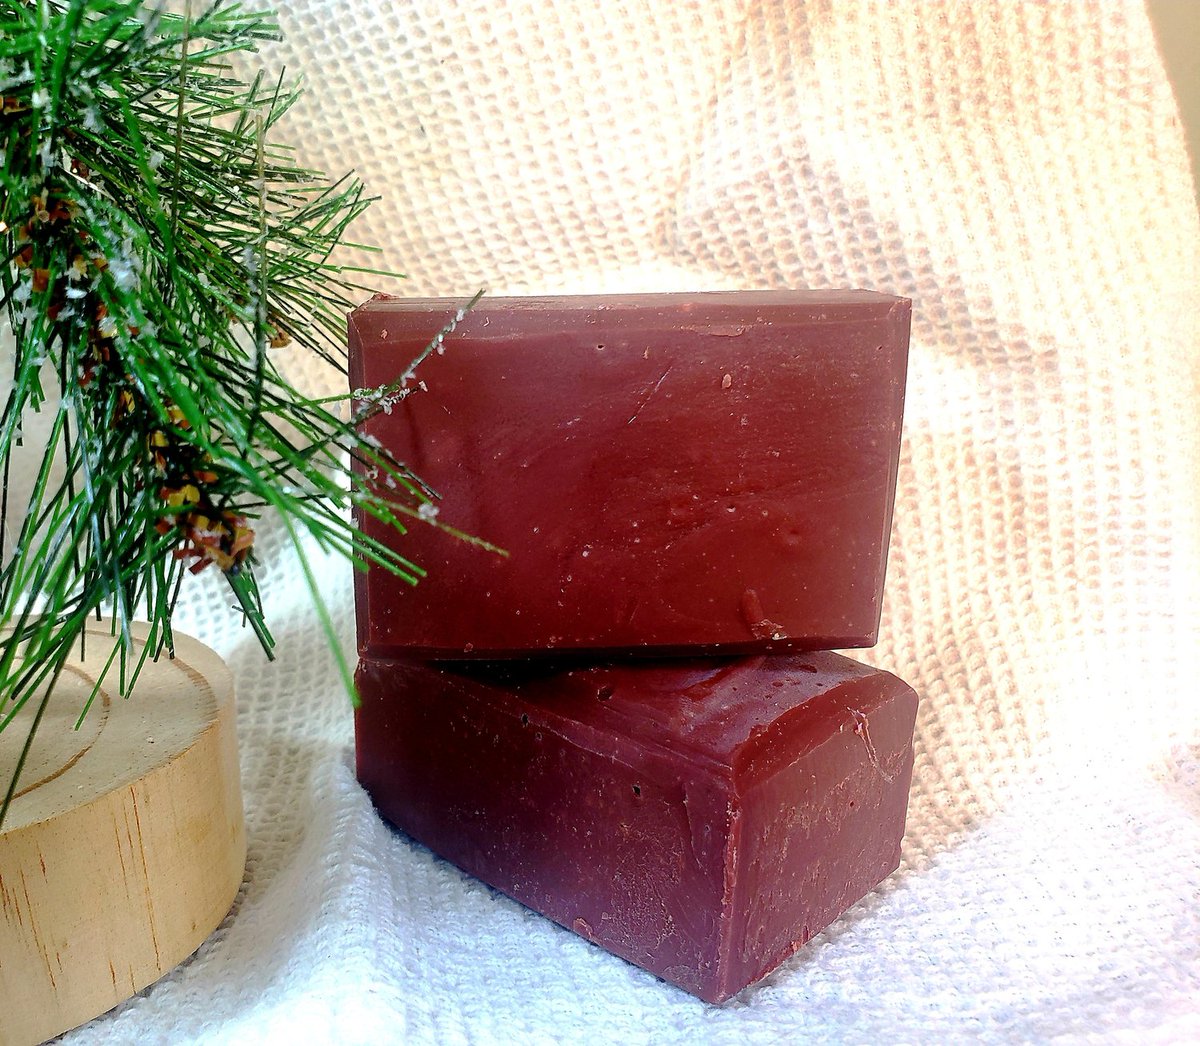 Tobacco and Bay Leaf is another of our new limited edition soaps! This is a fresh mix of bay leaf, fir needle, cedarwood, bergamot, and tobacco. Perfect for the holiday season! Get yours at a 20% discount when you spend $36 or more with code HOLIDAYS2021 soapmagic.com/limited-editio…